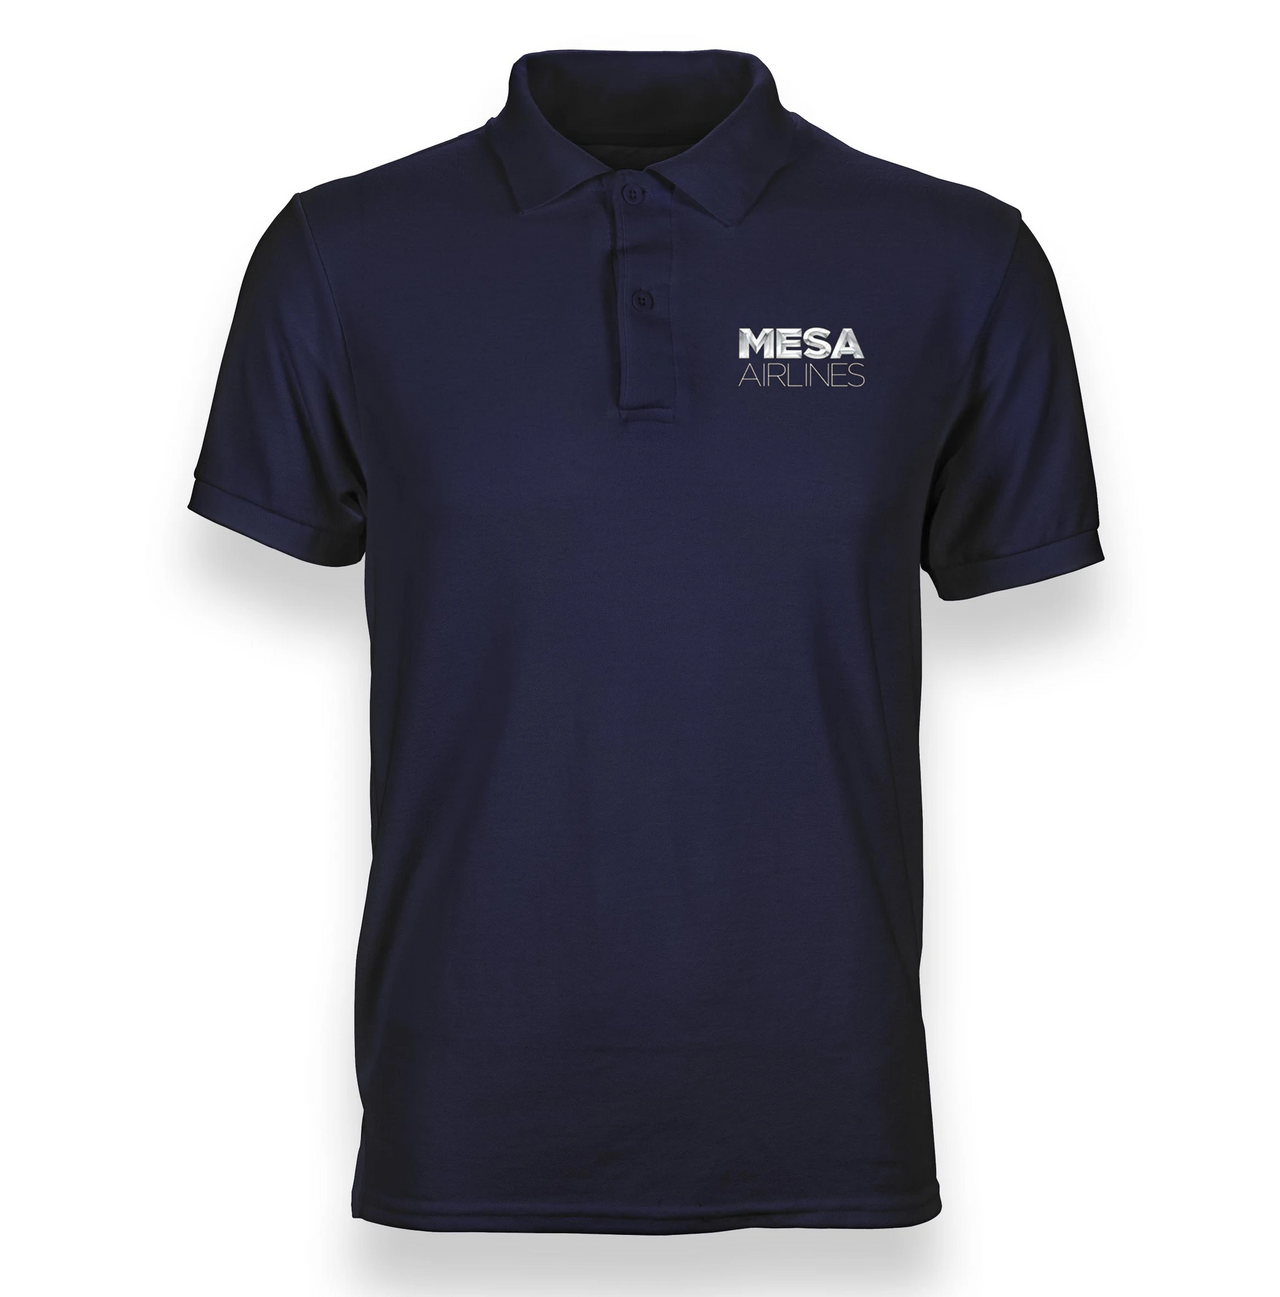 MESA AIRLINES POLO T-SHIRT